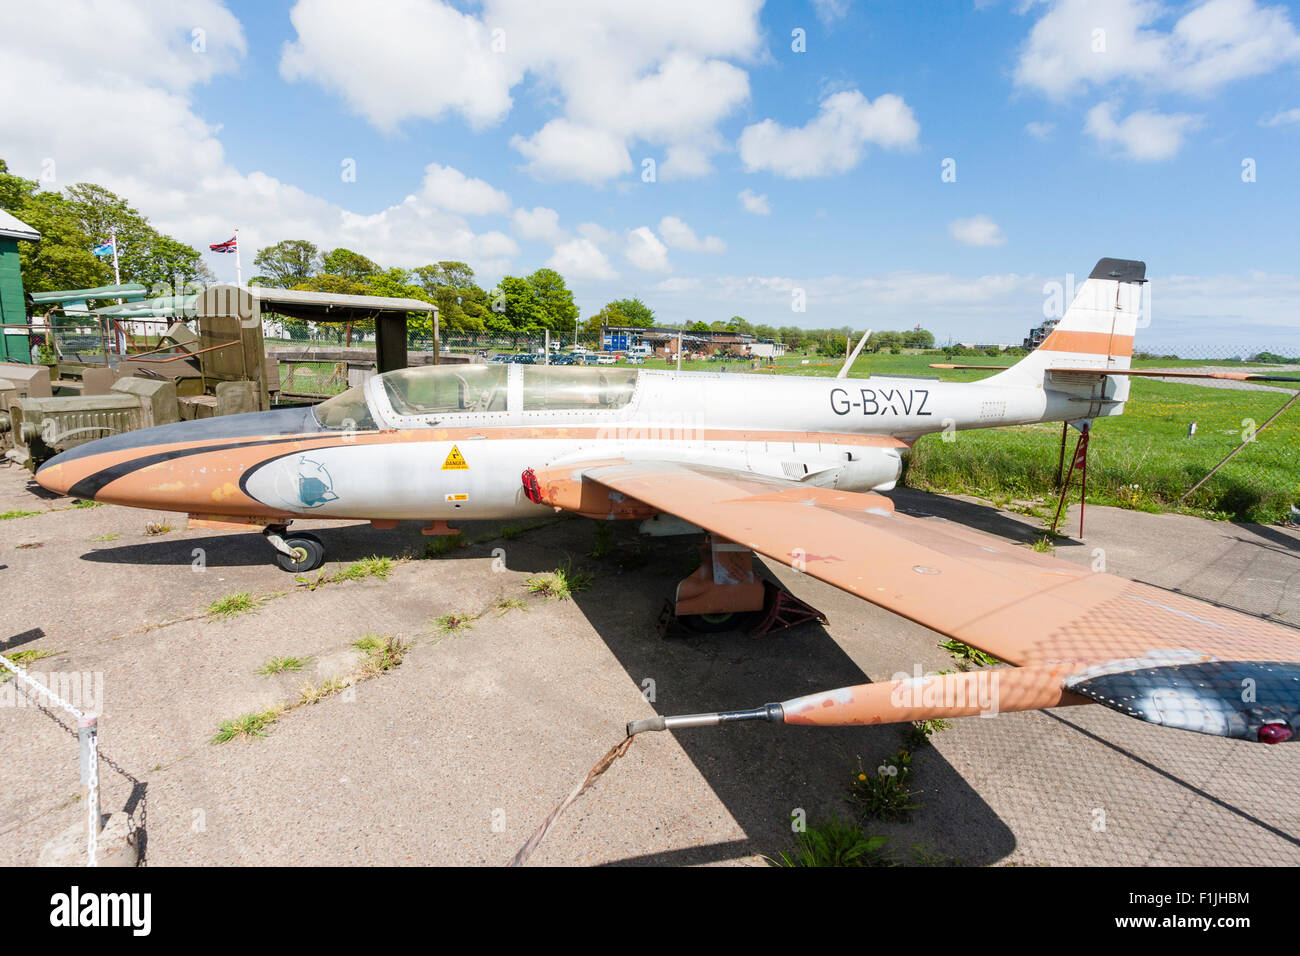 Manston airport museum. PZL Mielec TS-11 Iskra, a Polish jet trainer, on concrete airport apron in bright sunshine. Stock Photo